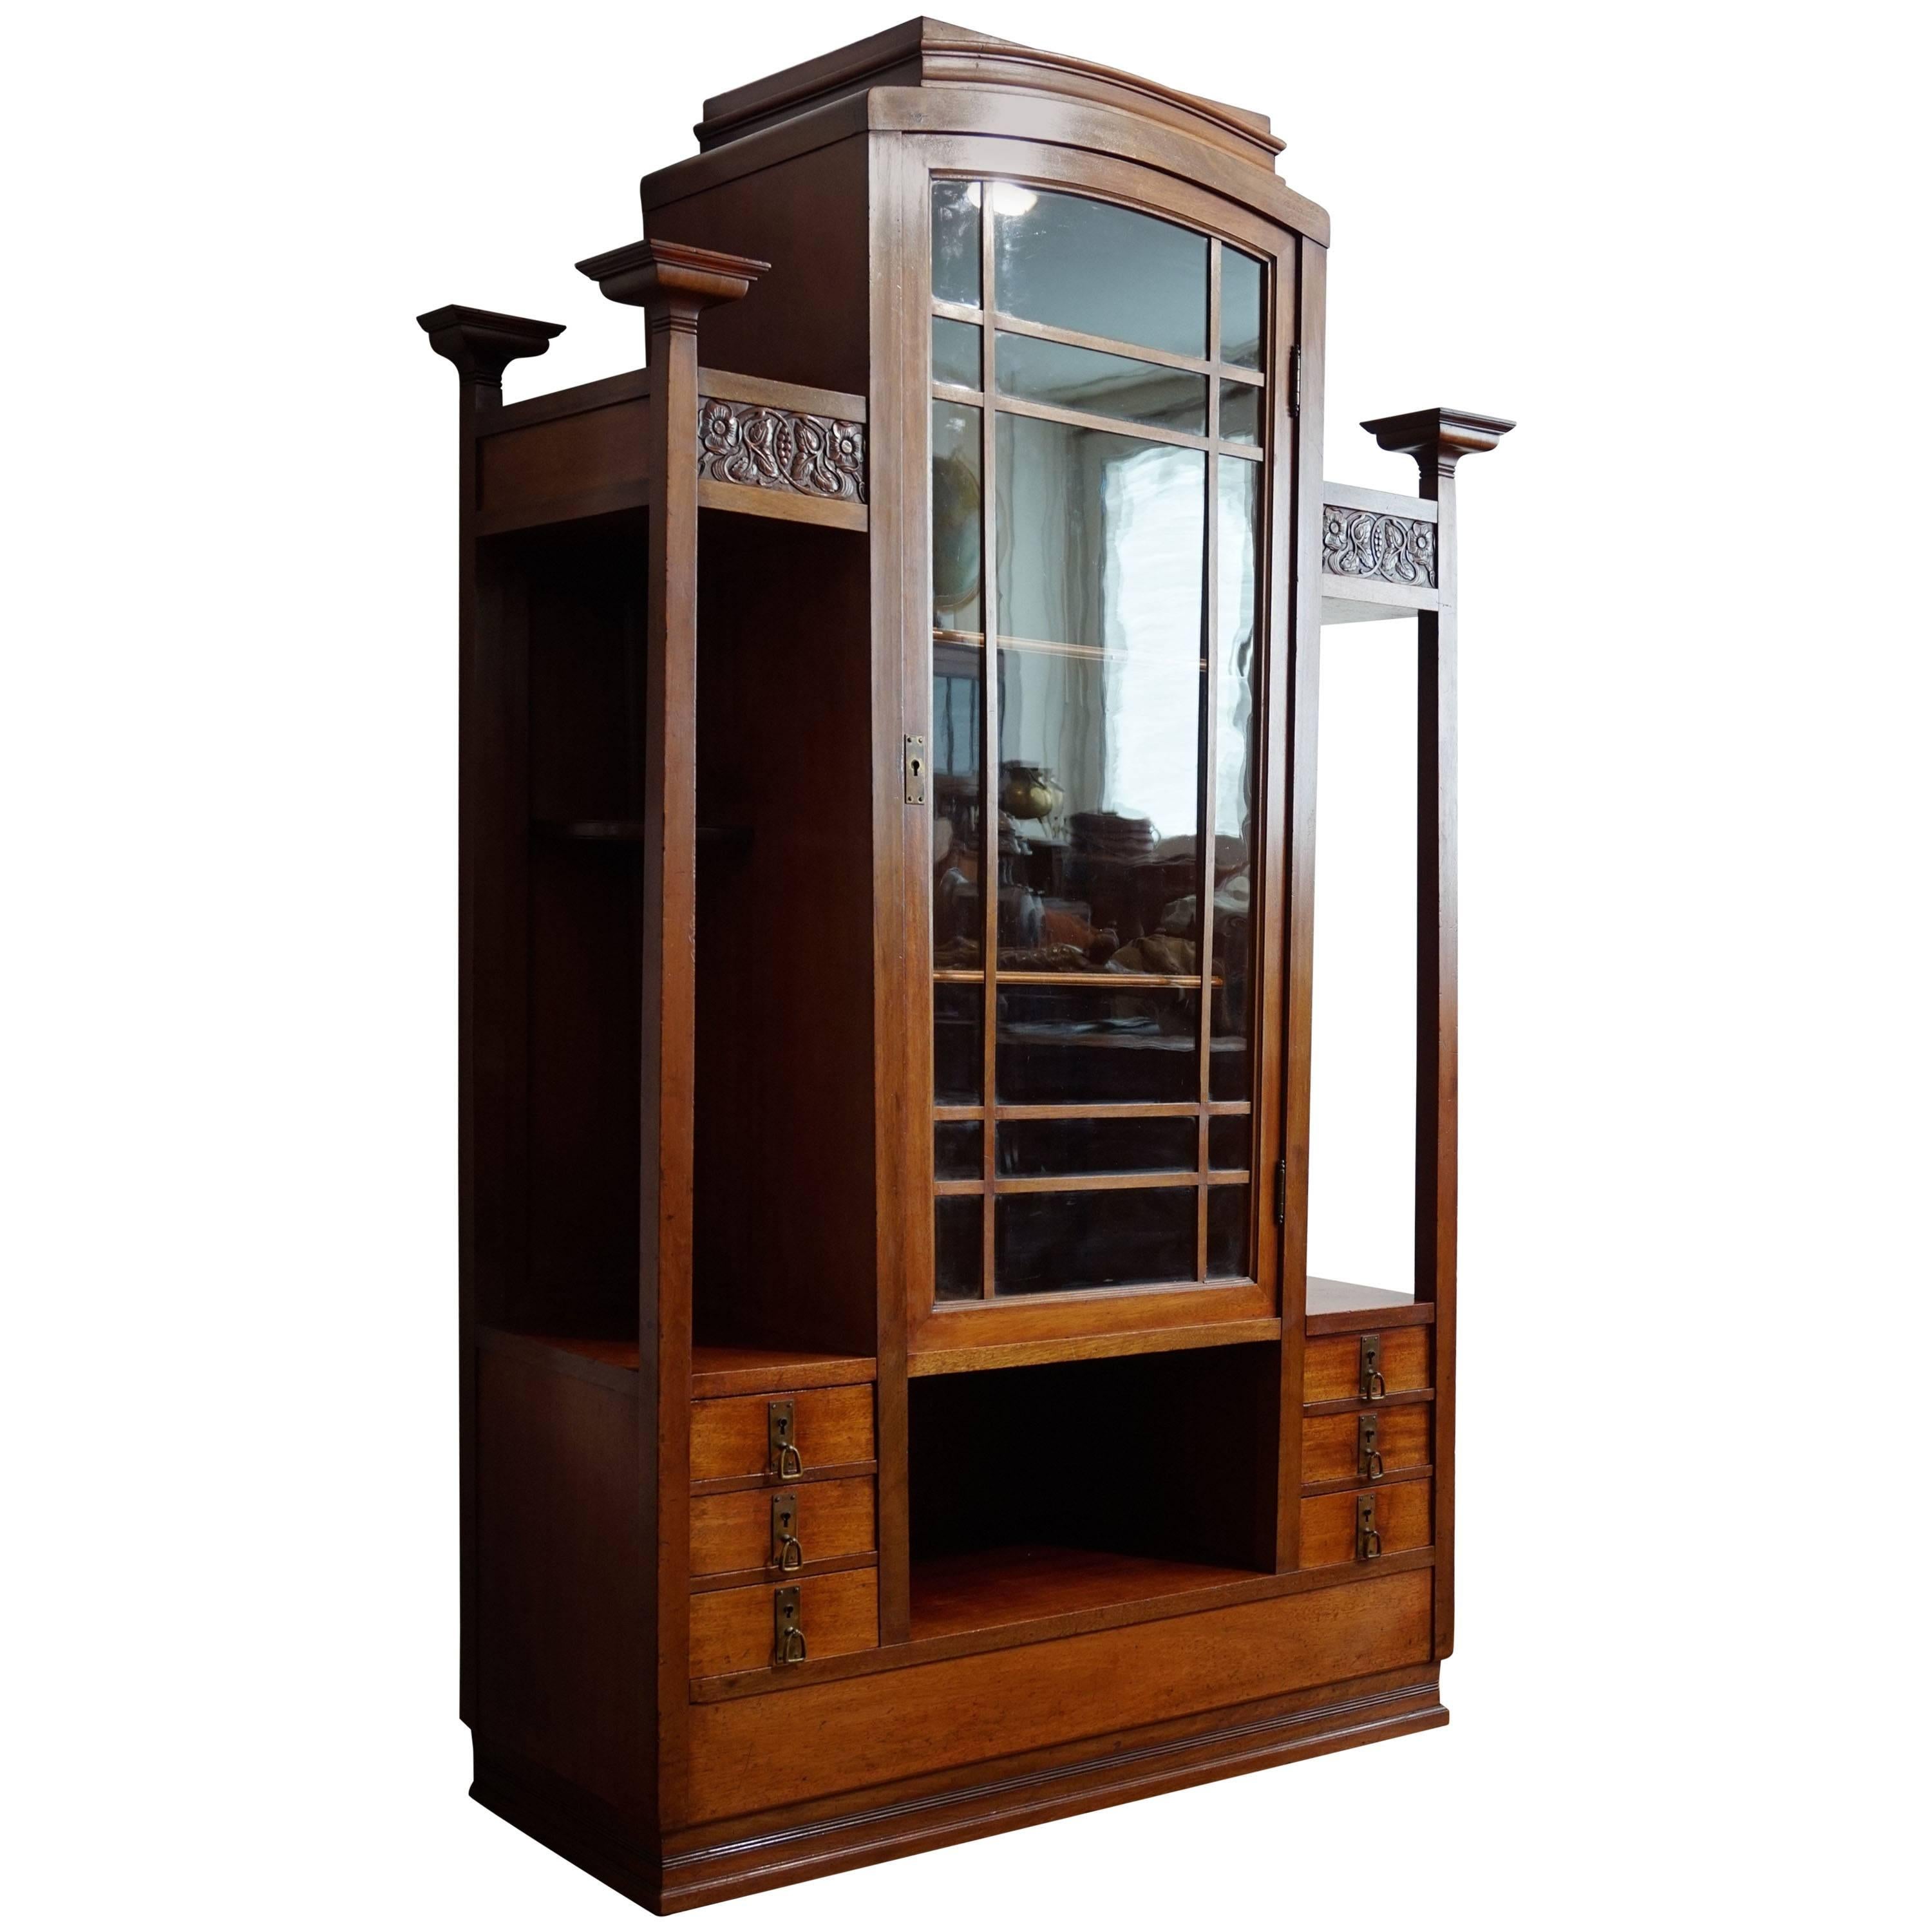 Early 20th Century Art Nouveau Display Cabinet with Drawers and Pilars for Vases